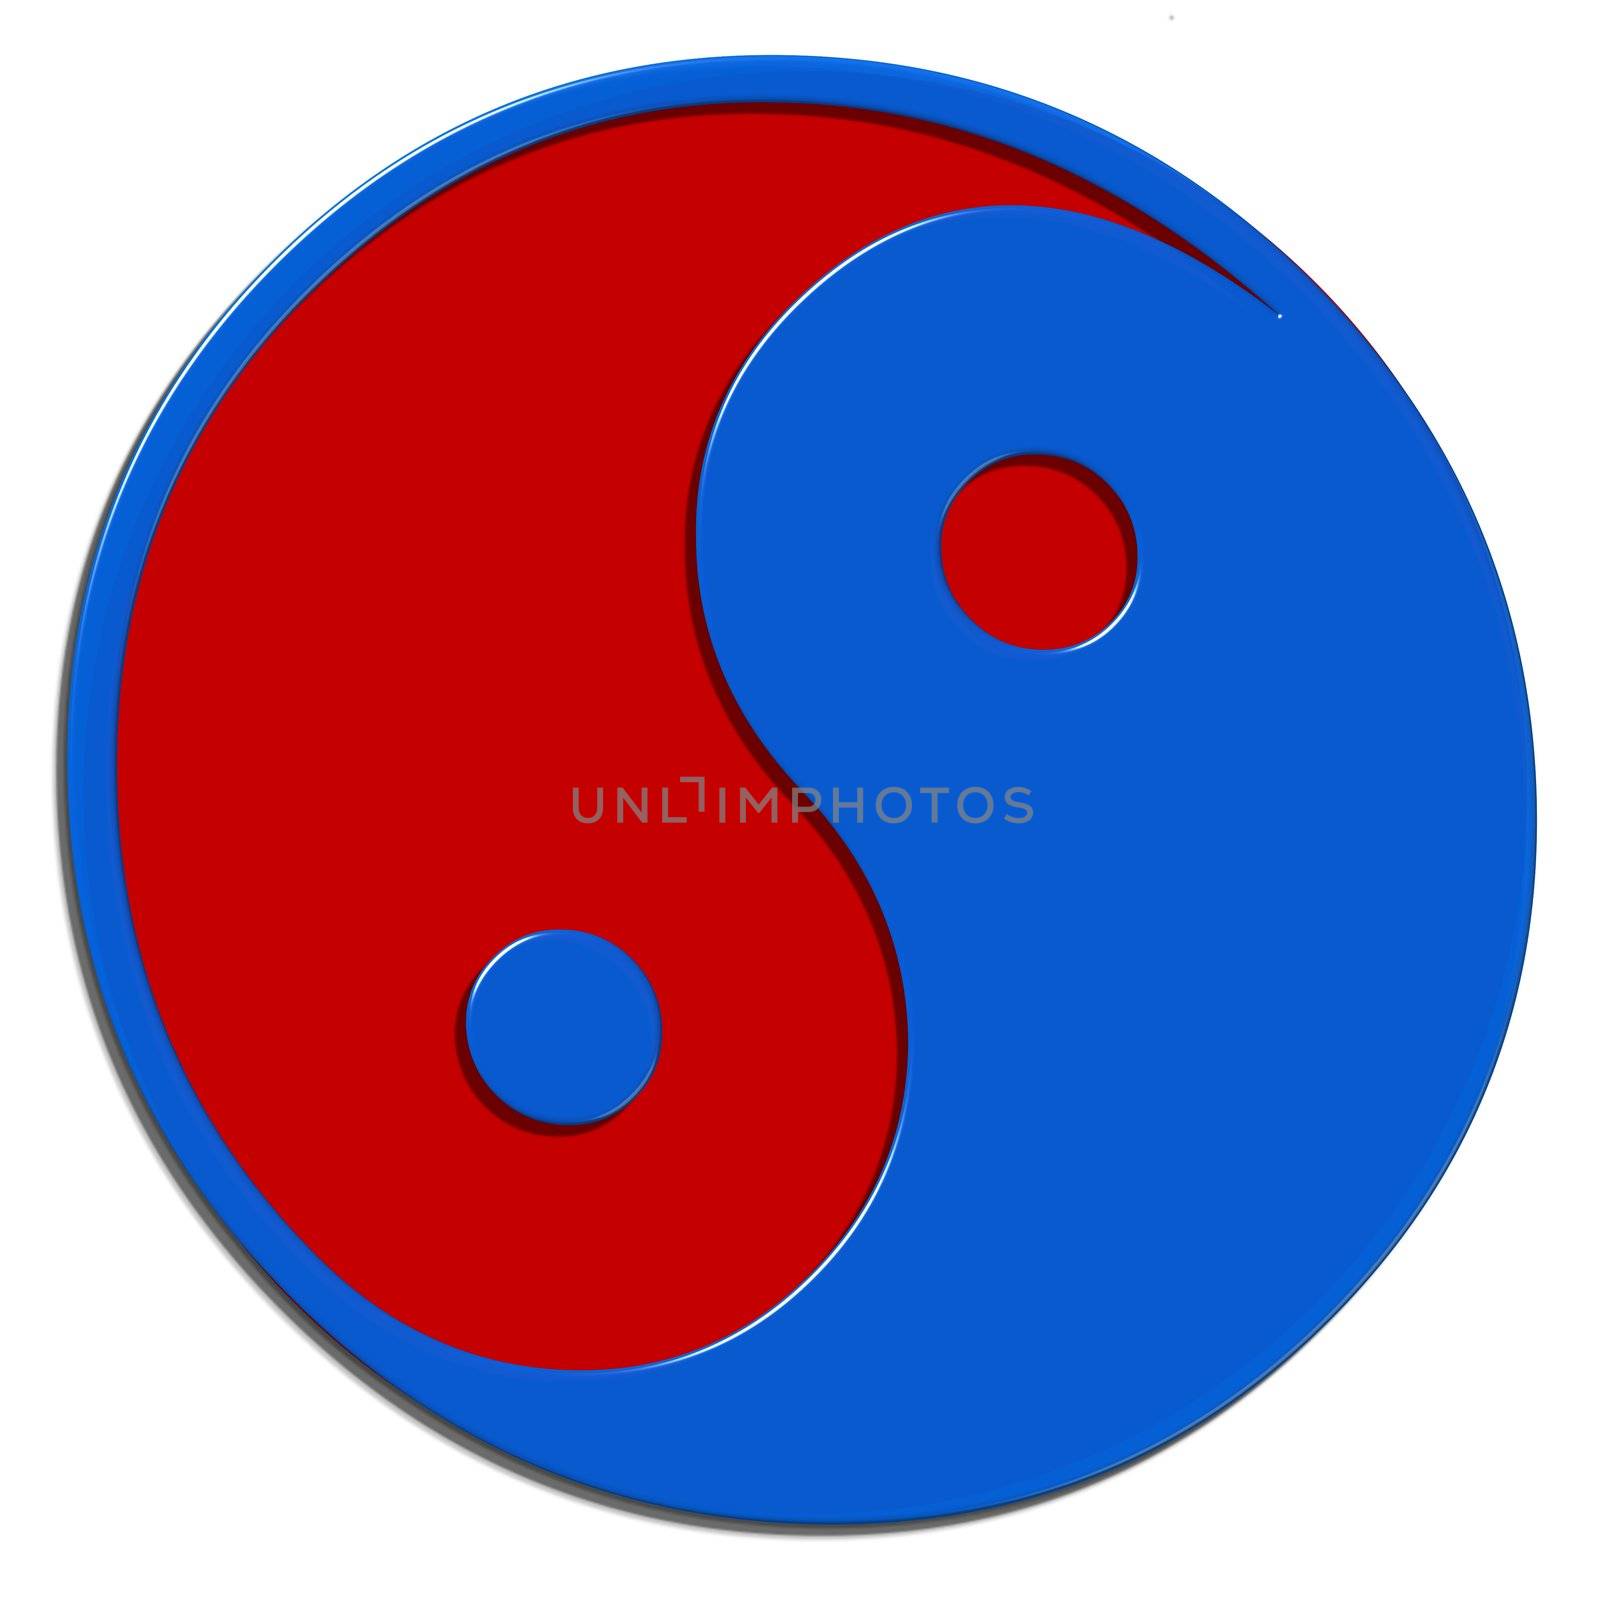 ying and yang in red and blue